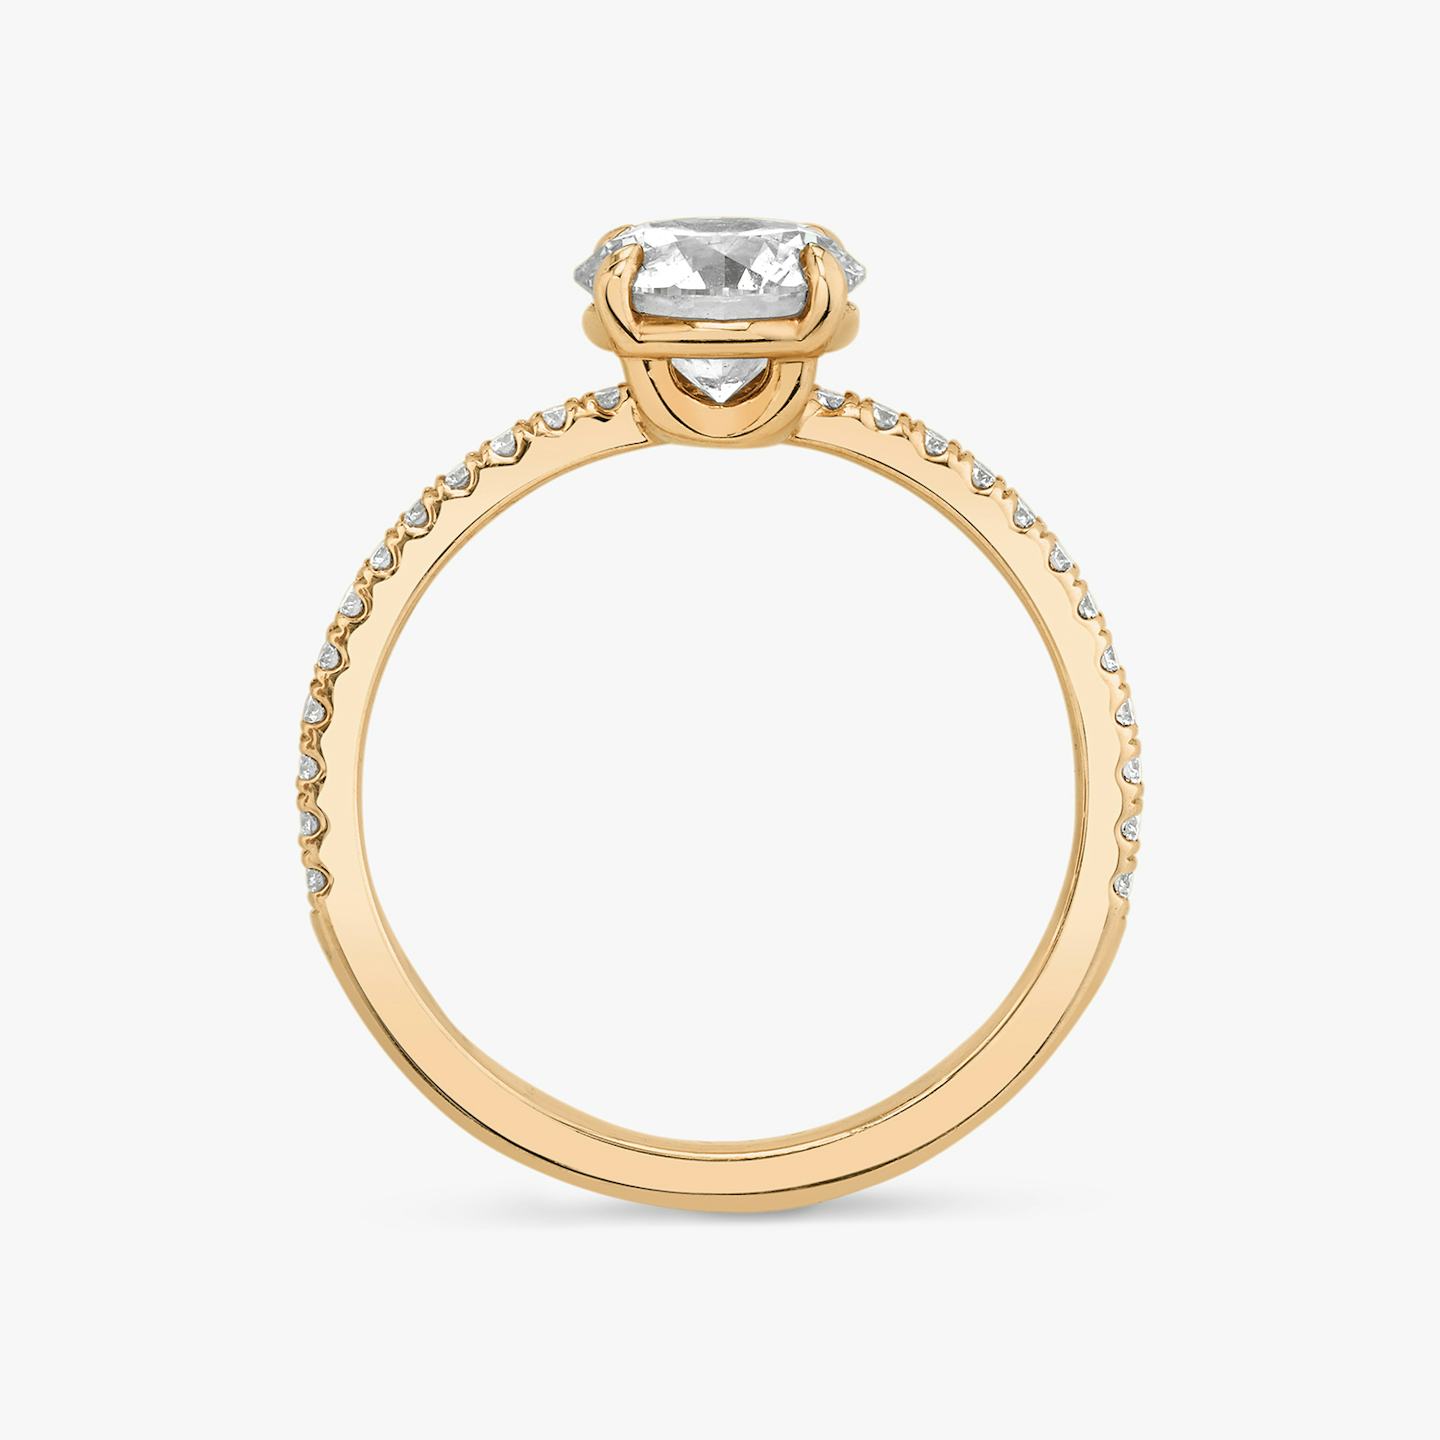 The Hover | Round Brilliant | 14k | 14k Rose Gold | Band: Pavé | Carat weight: 1 | Diamond orientation: vertical